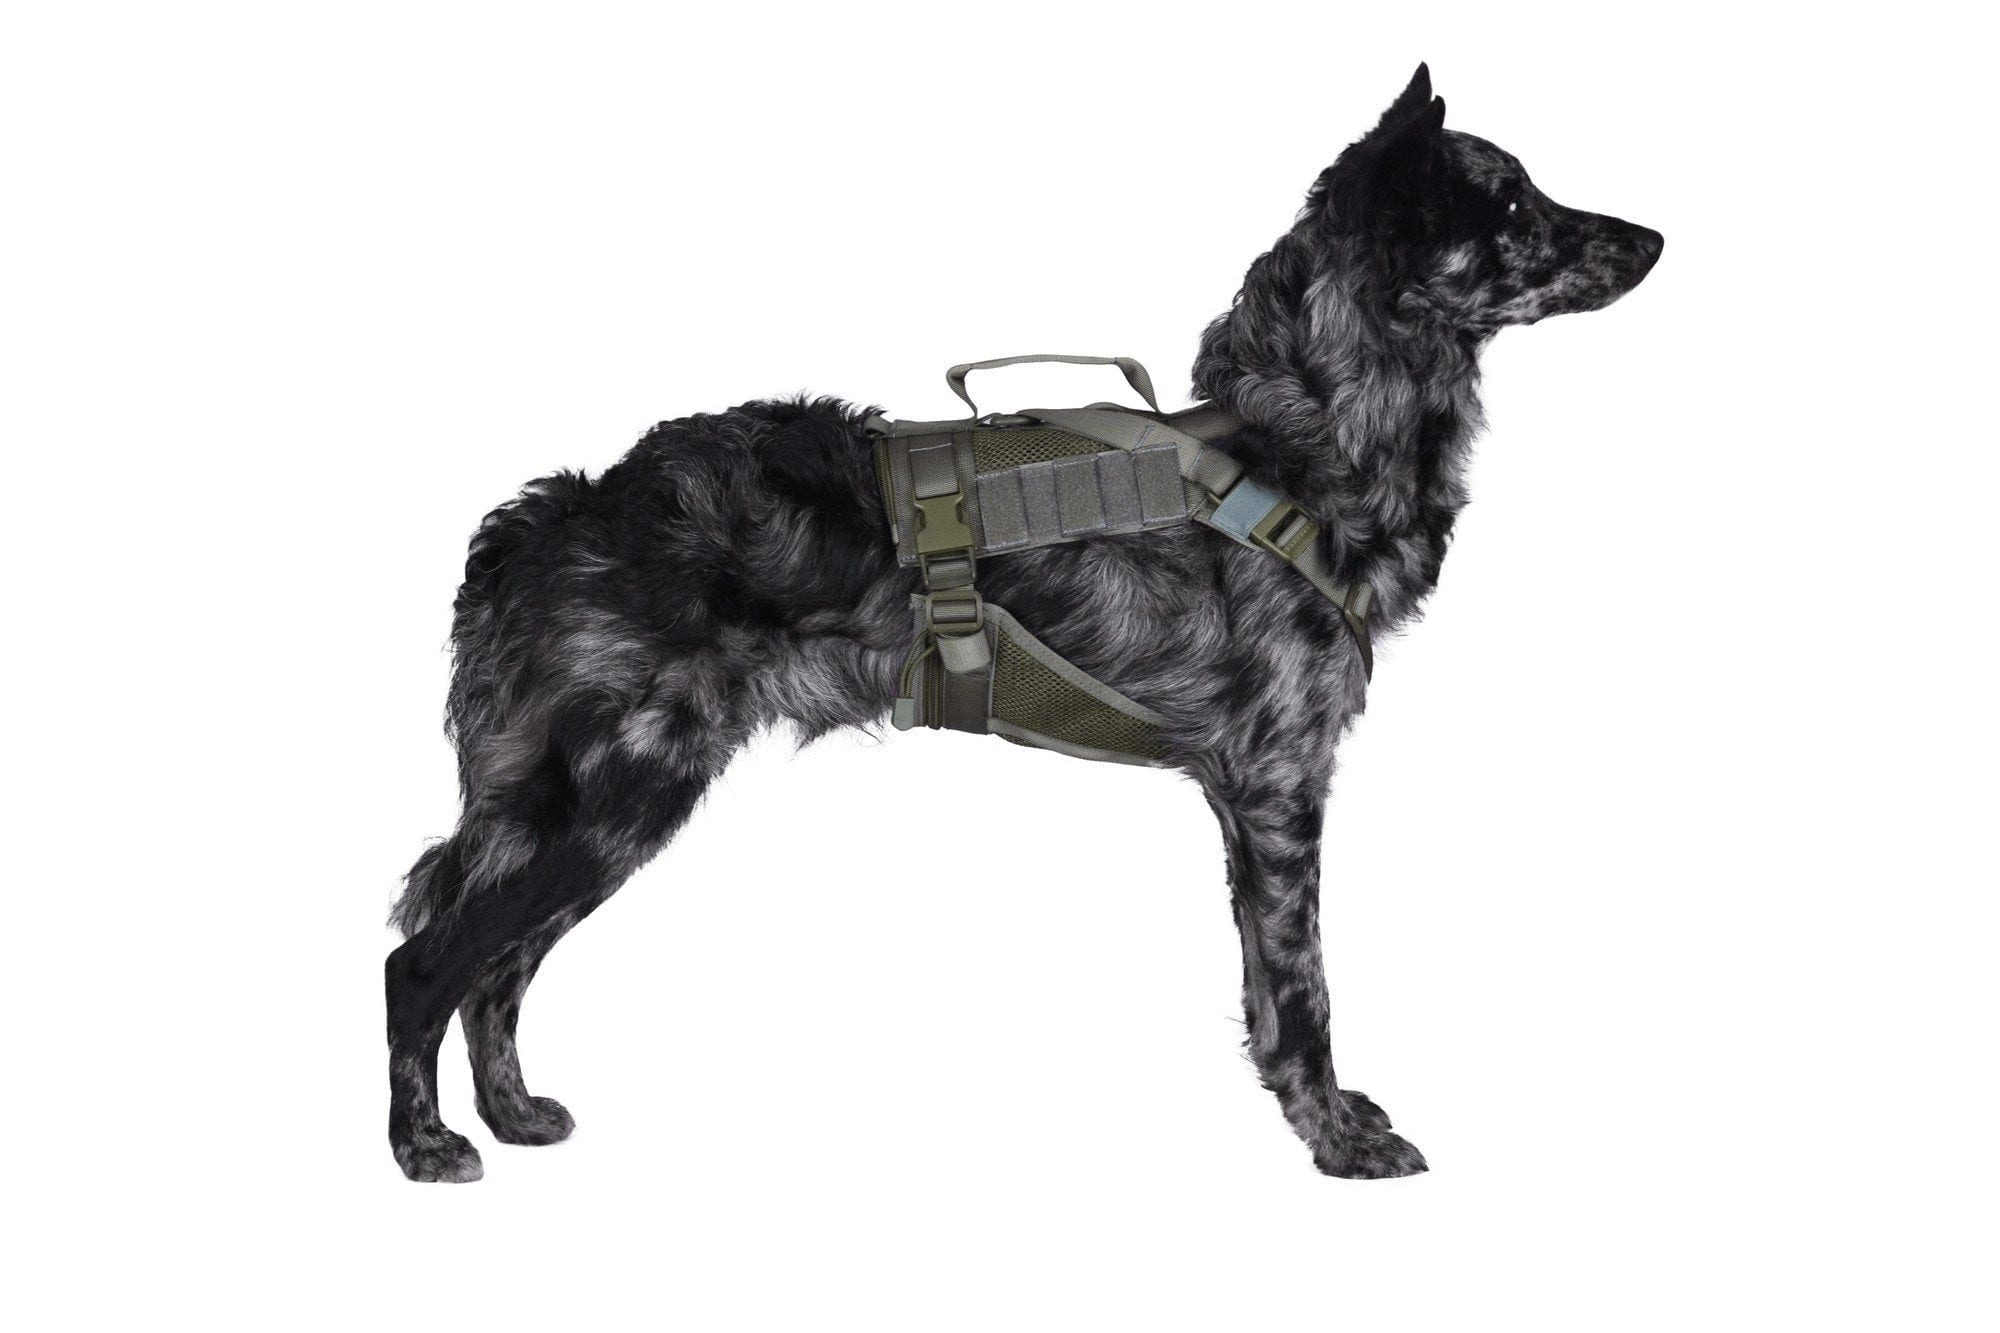 Tactical harness for dog - ranger green